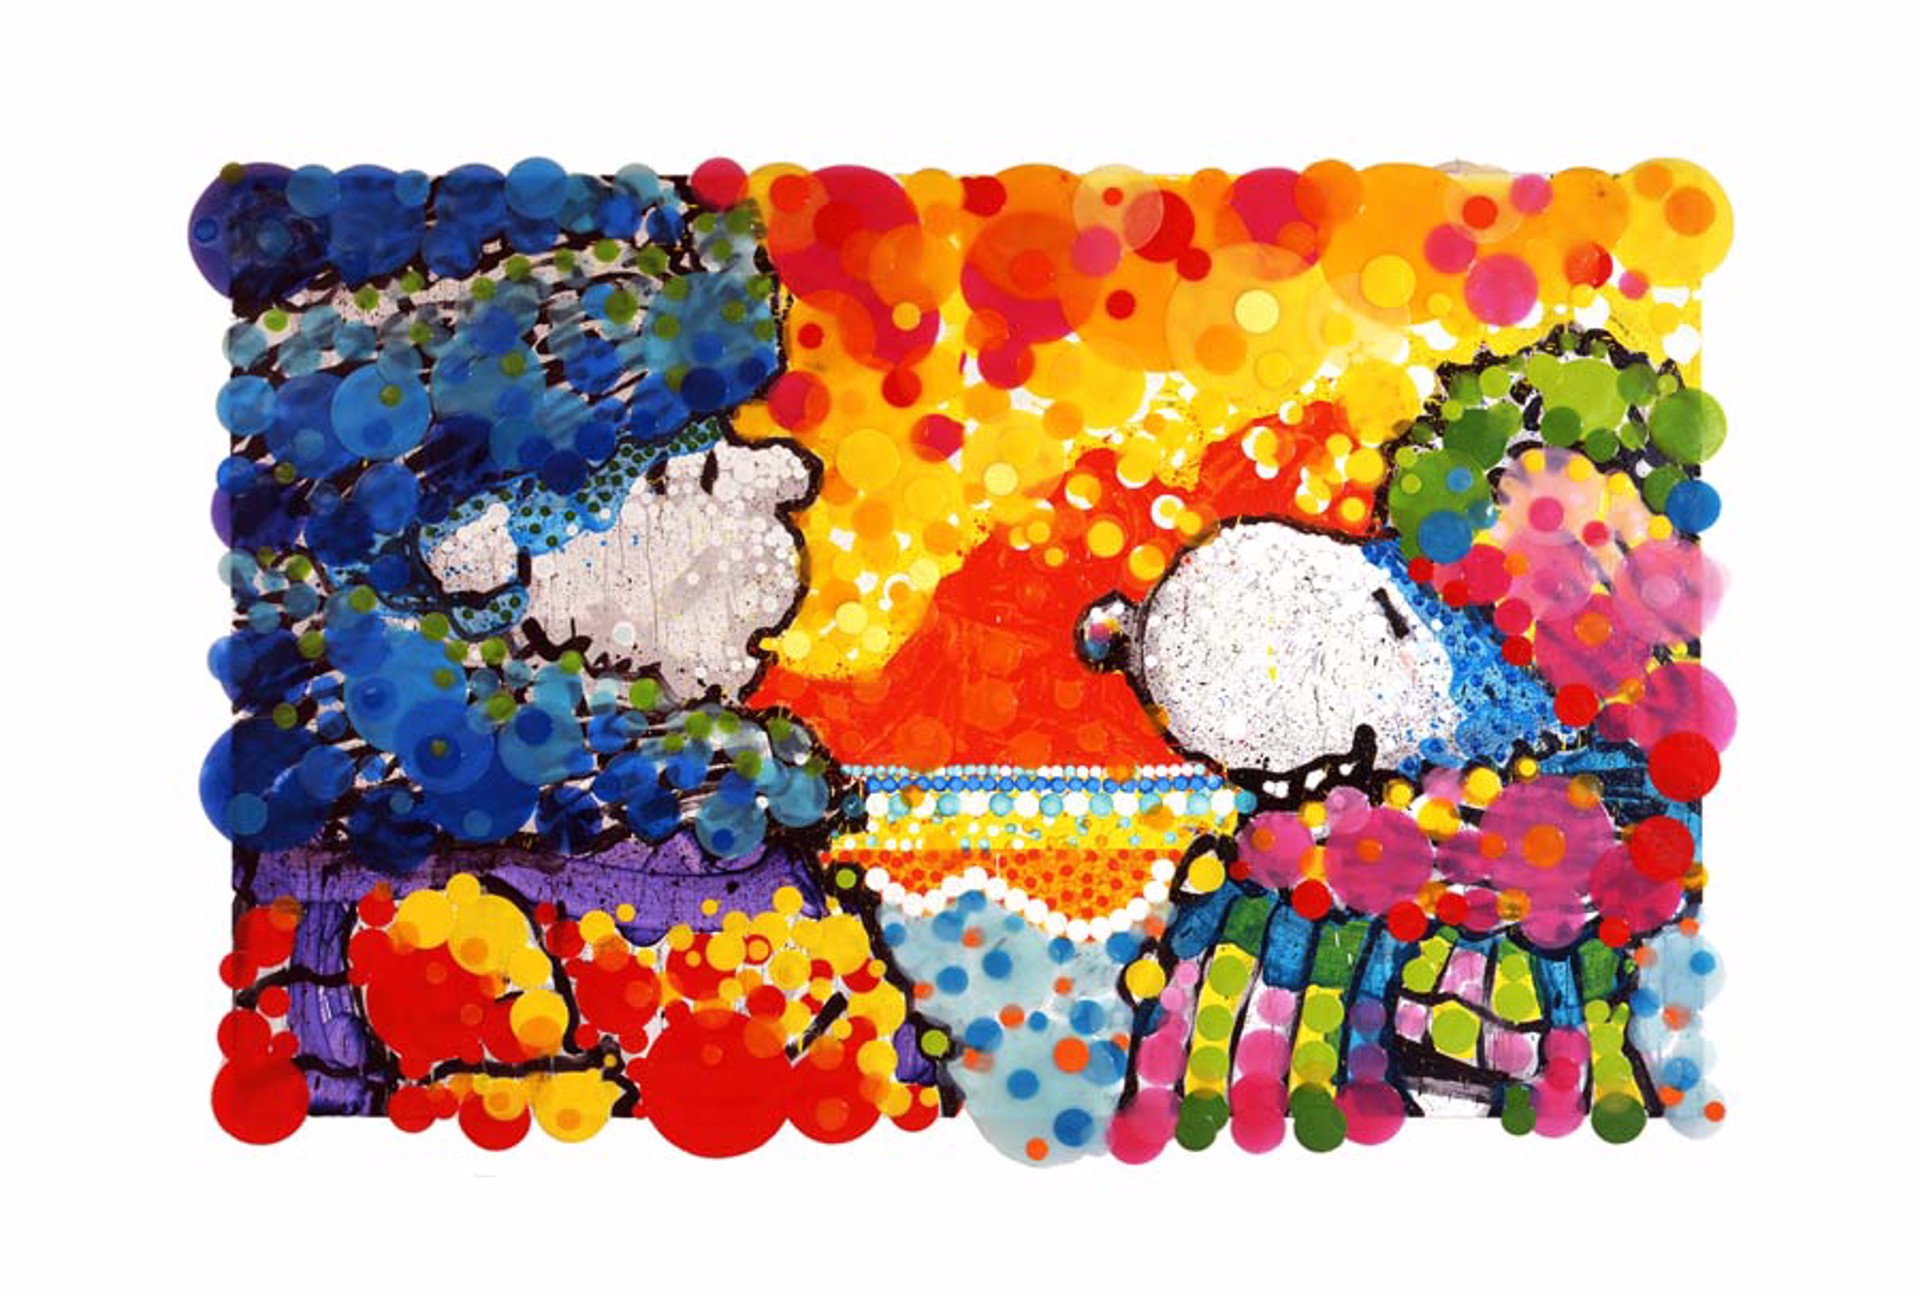 Cracking Up by Tom Everhart